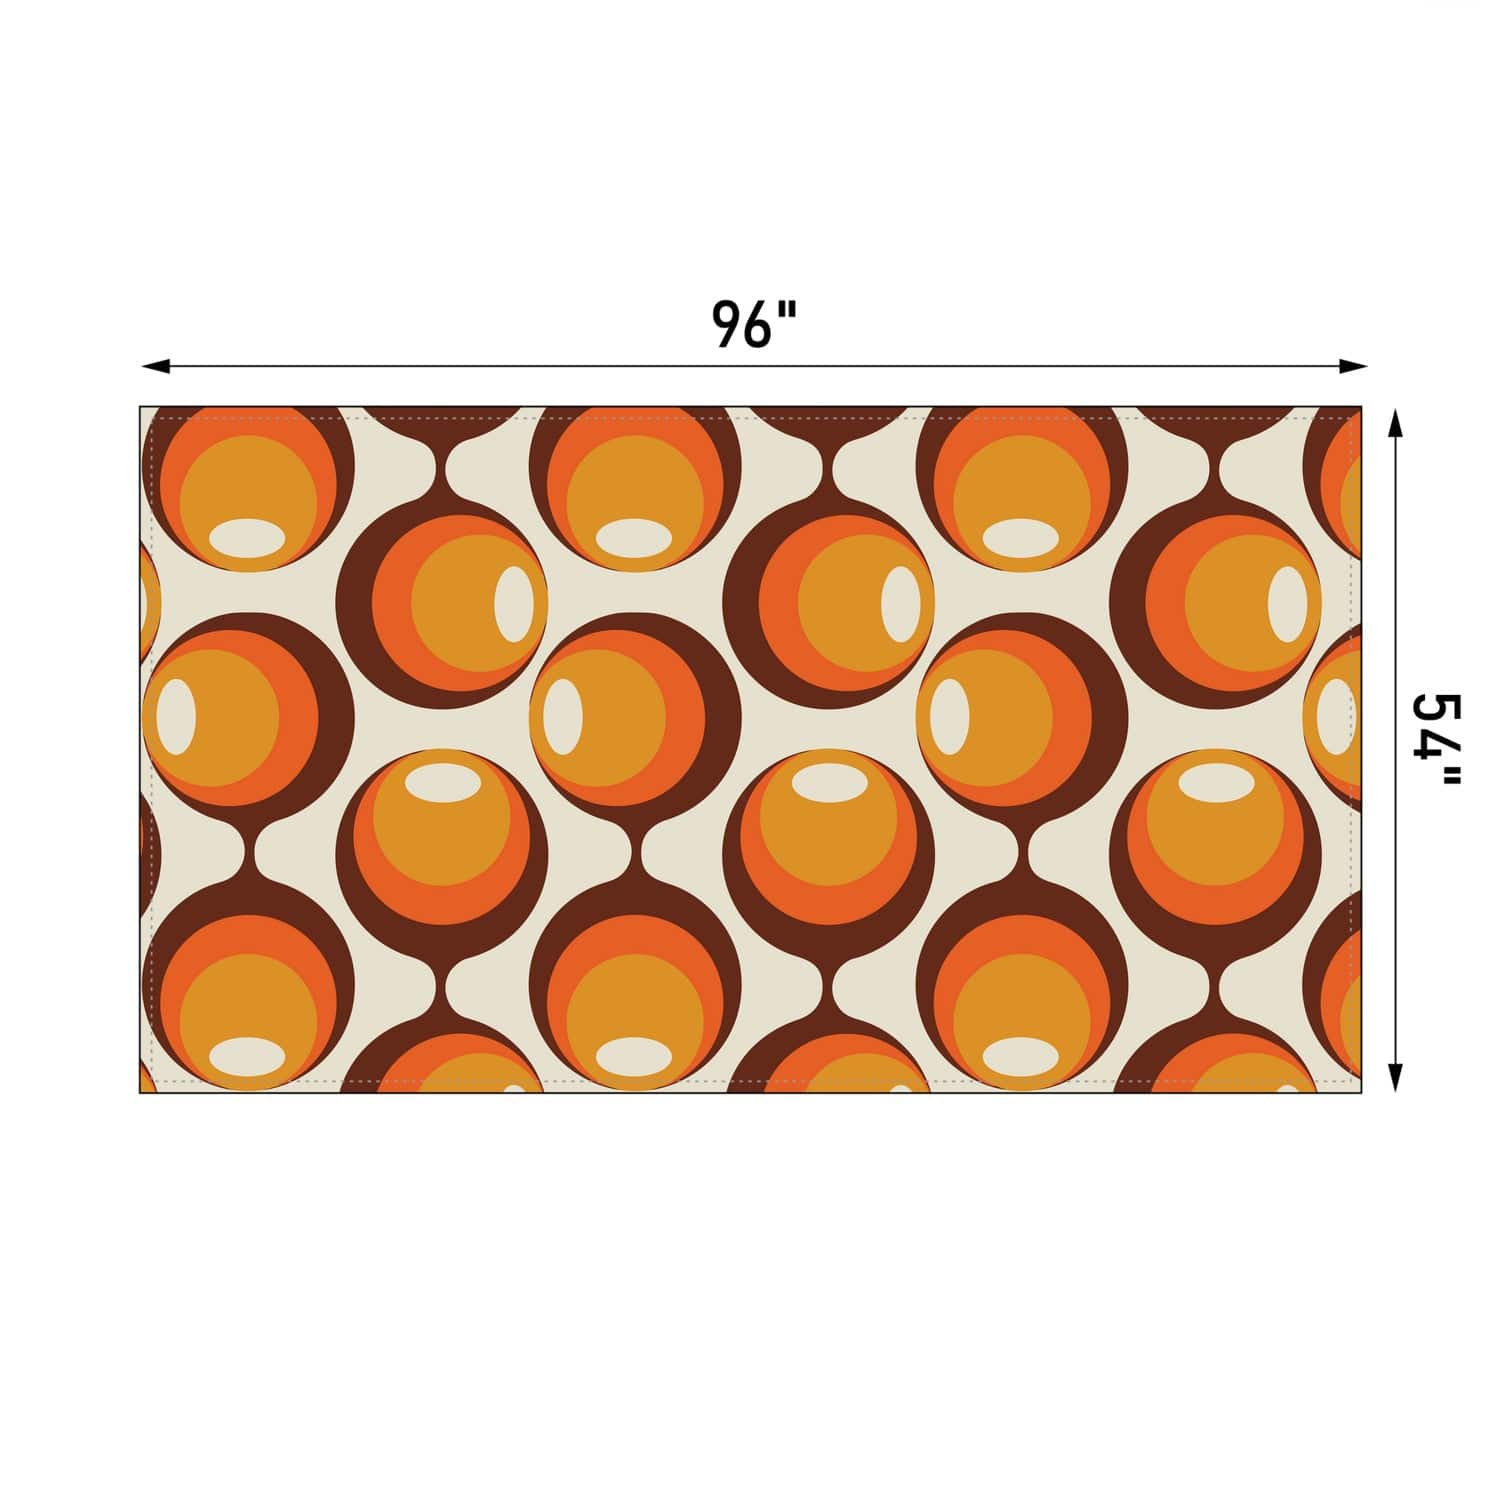 kate-mcenroe-nyc Mid Century Modern Retro Groovy Orbs Tablecloth, Atomic Age Vintage Style Orange, Brown, Yellow Table Linens Tablecloths 54&quot; x 96&quot; 108348